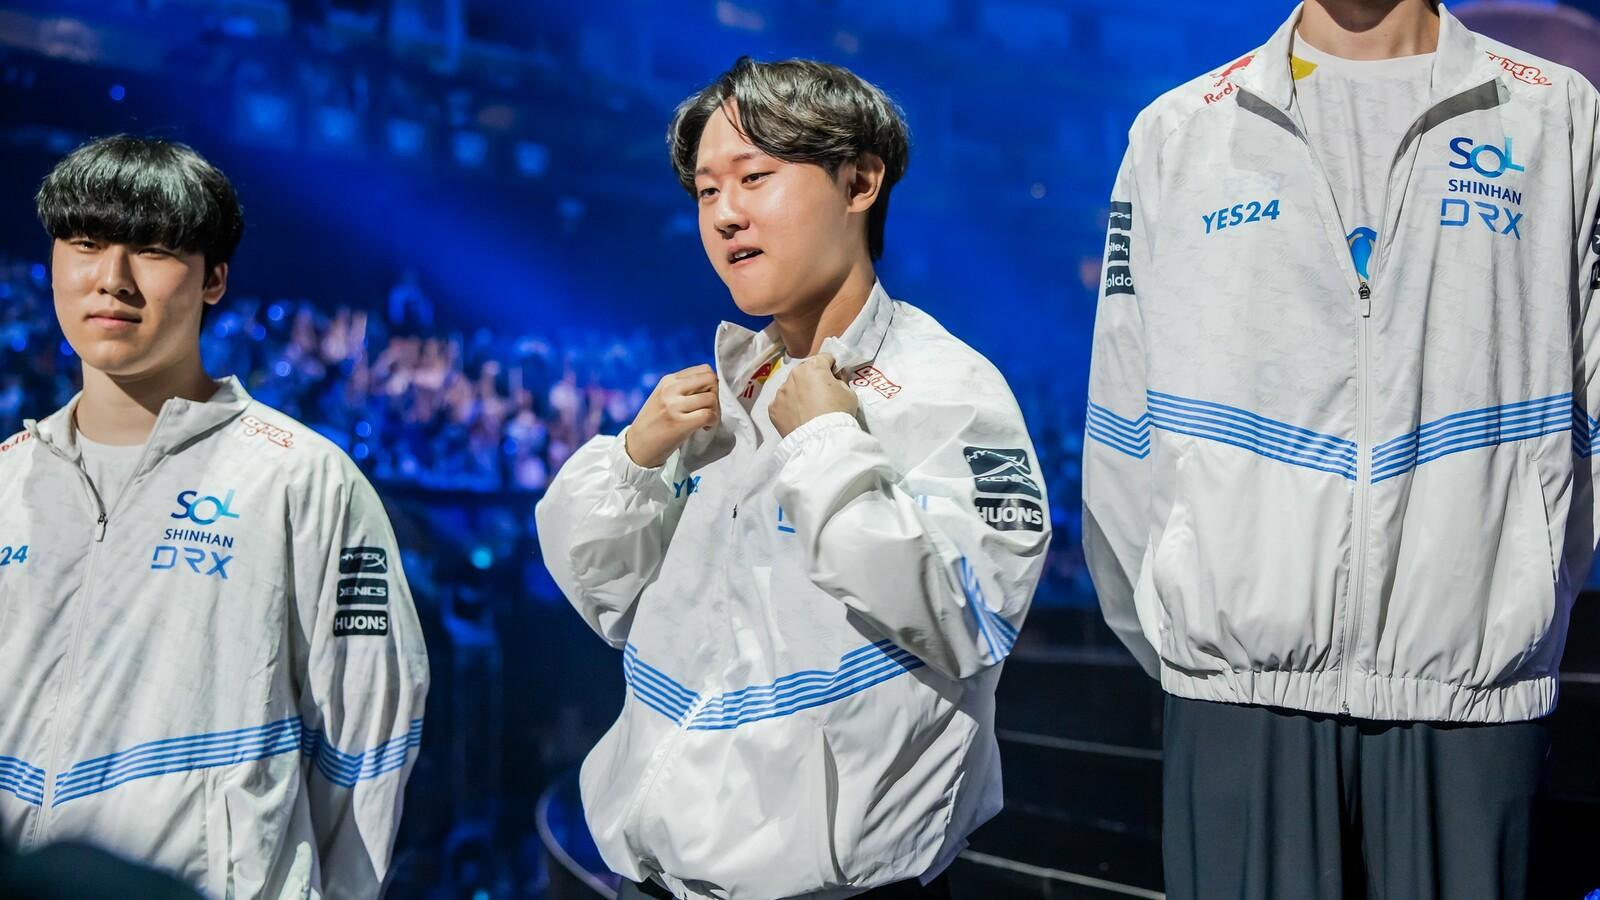 Pyosik Worlds 2022 before moving to Team Liquid